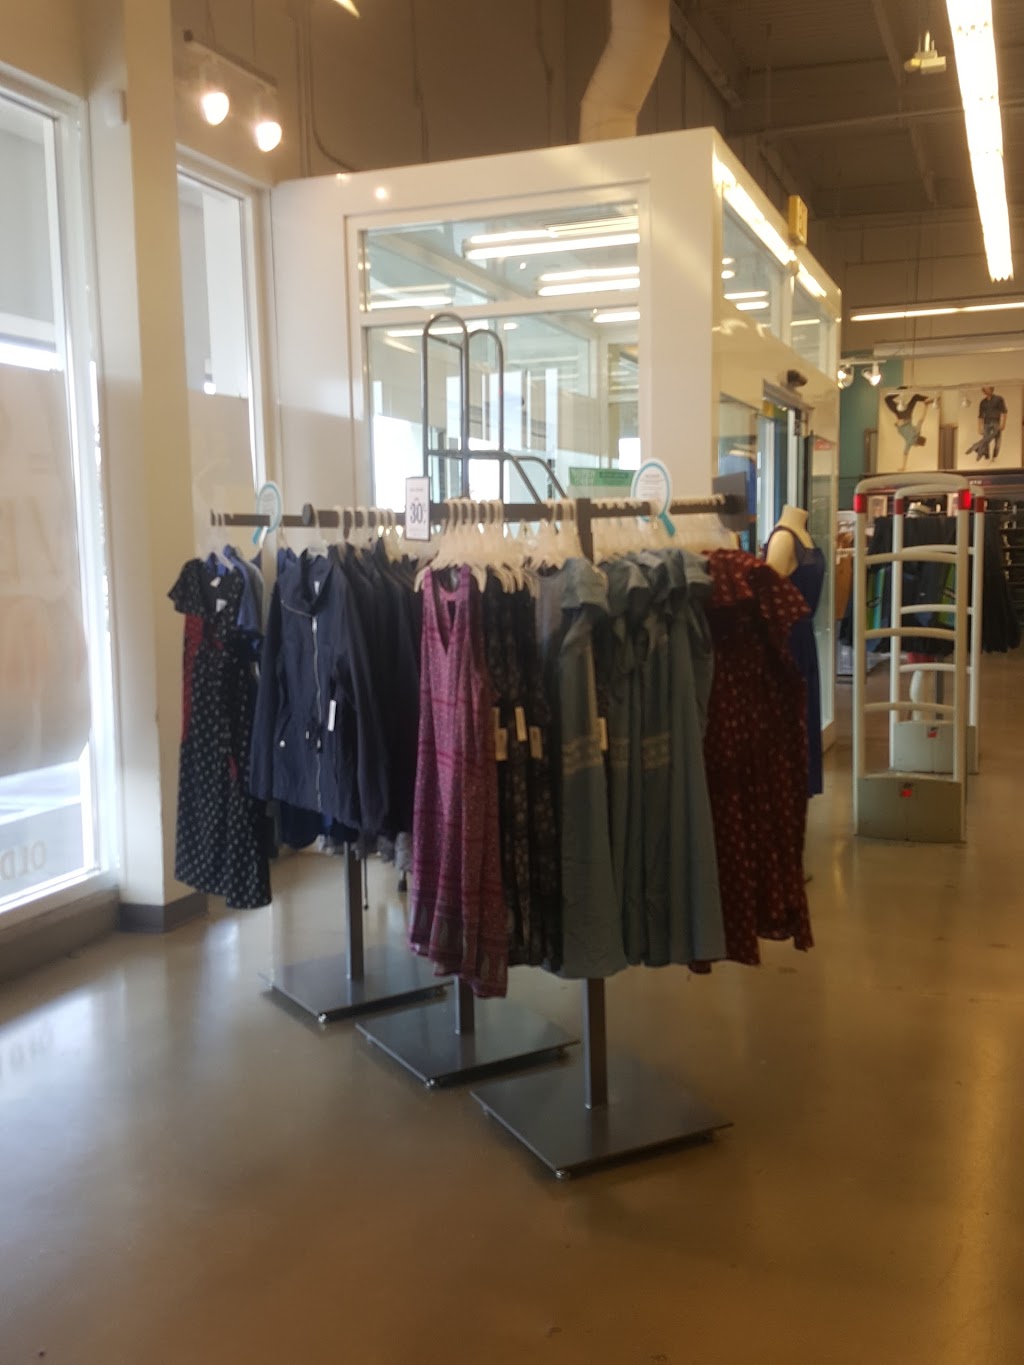 Old Navy | 3401 E Fairview Ave, Meridian, ID 83642, USA | Phone: (208) 419-3875